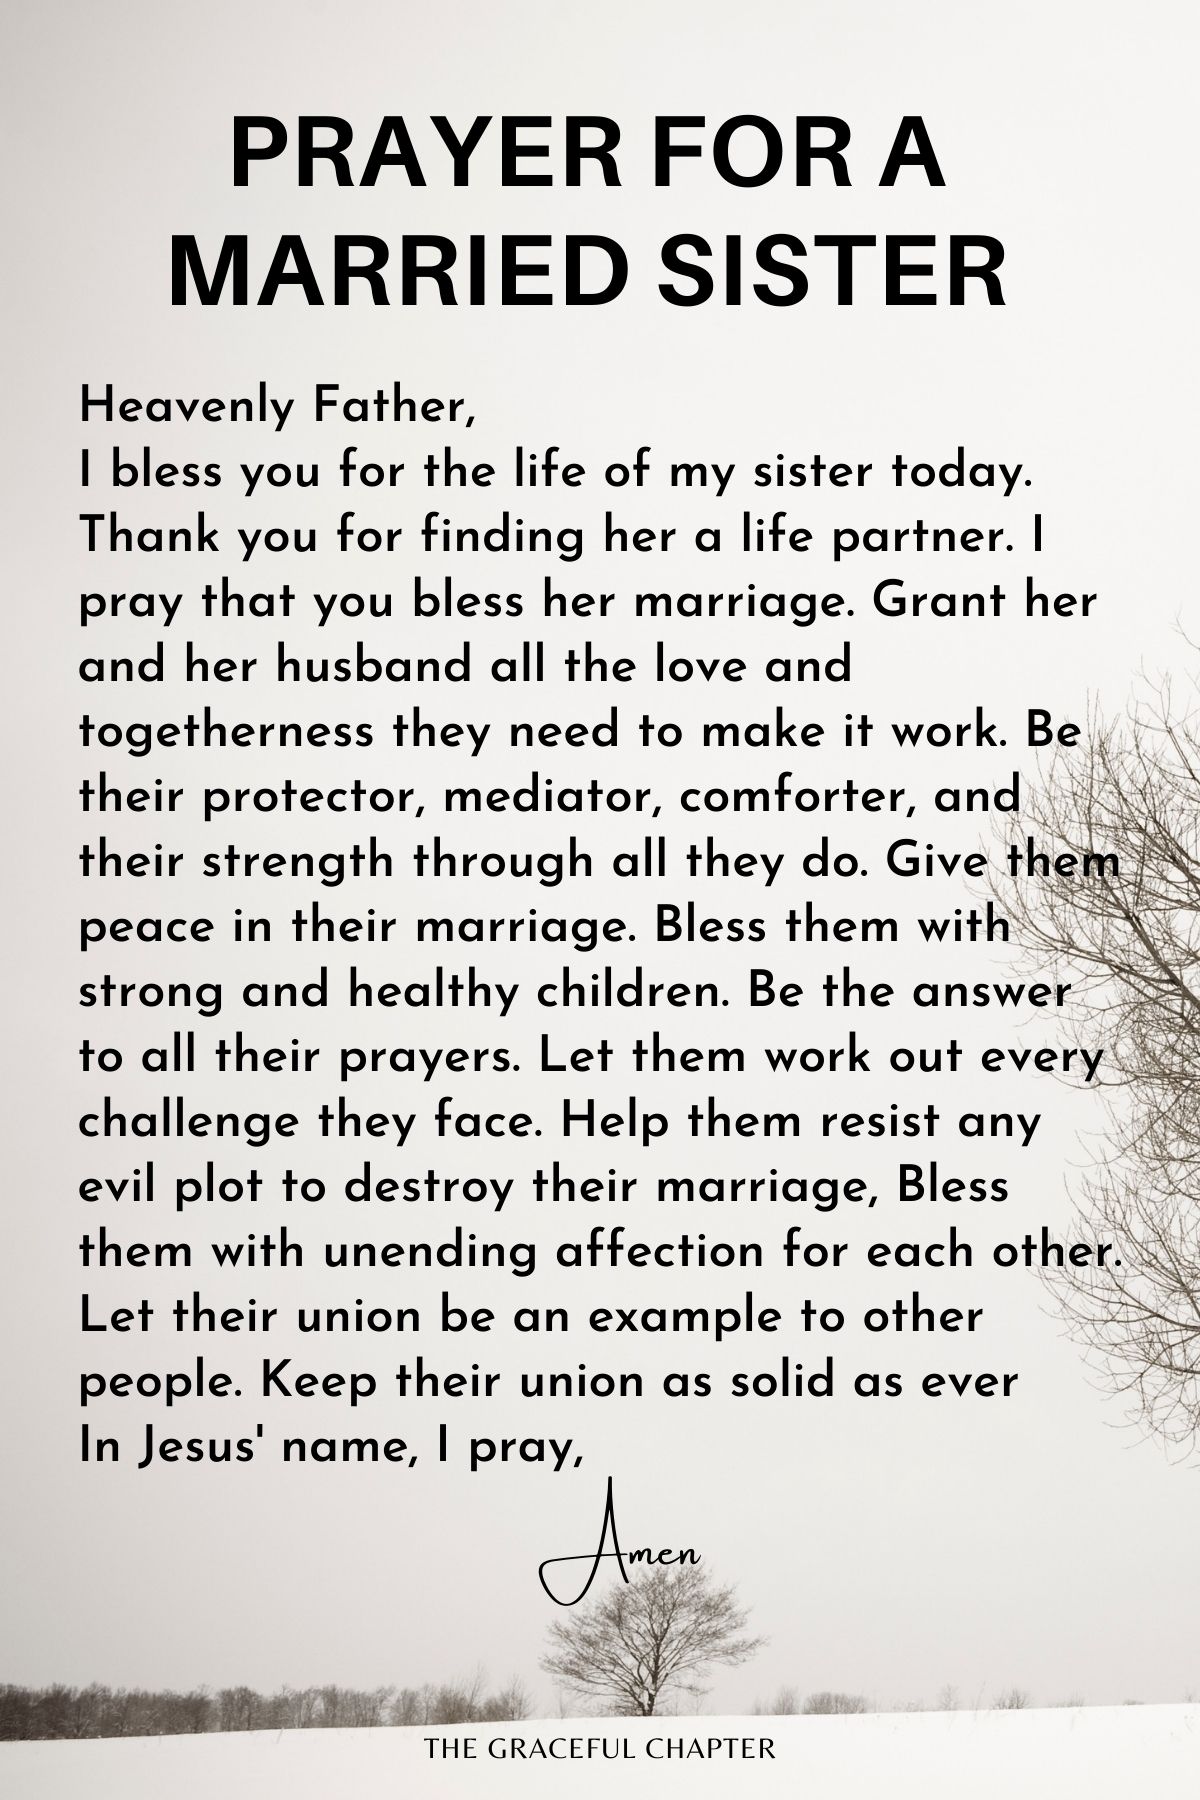 Prayer for a married sister